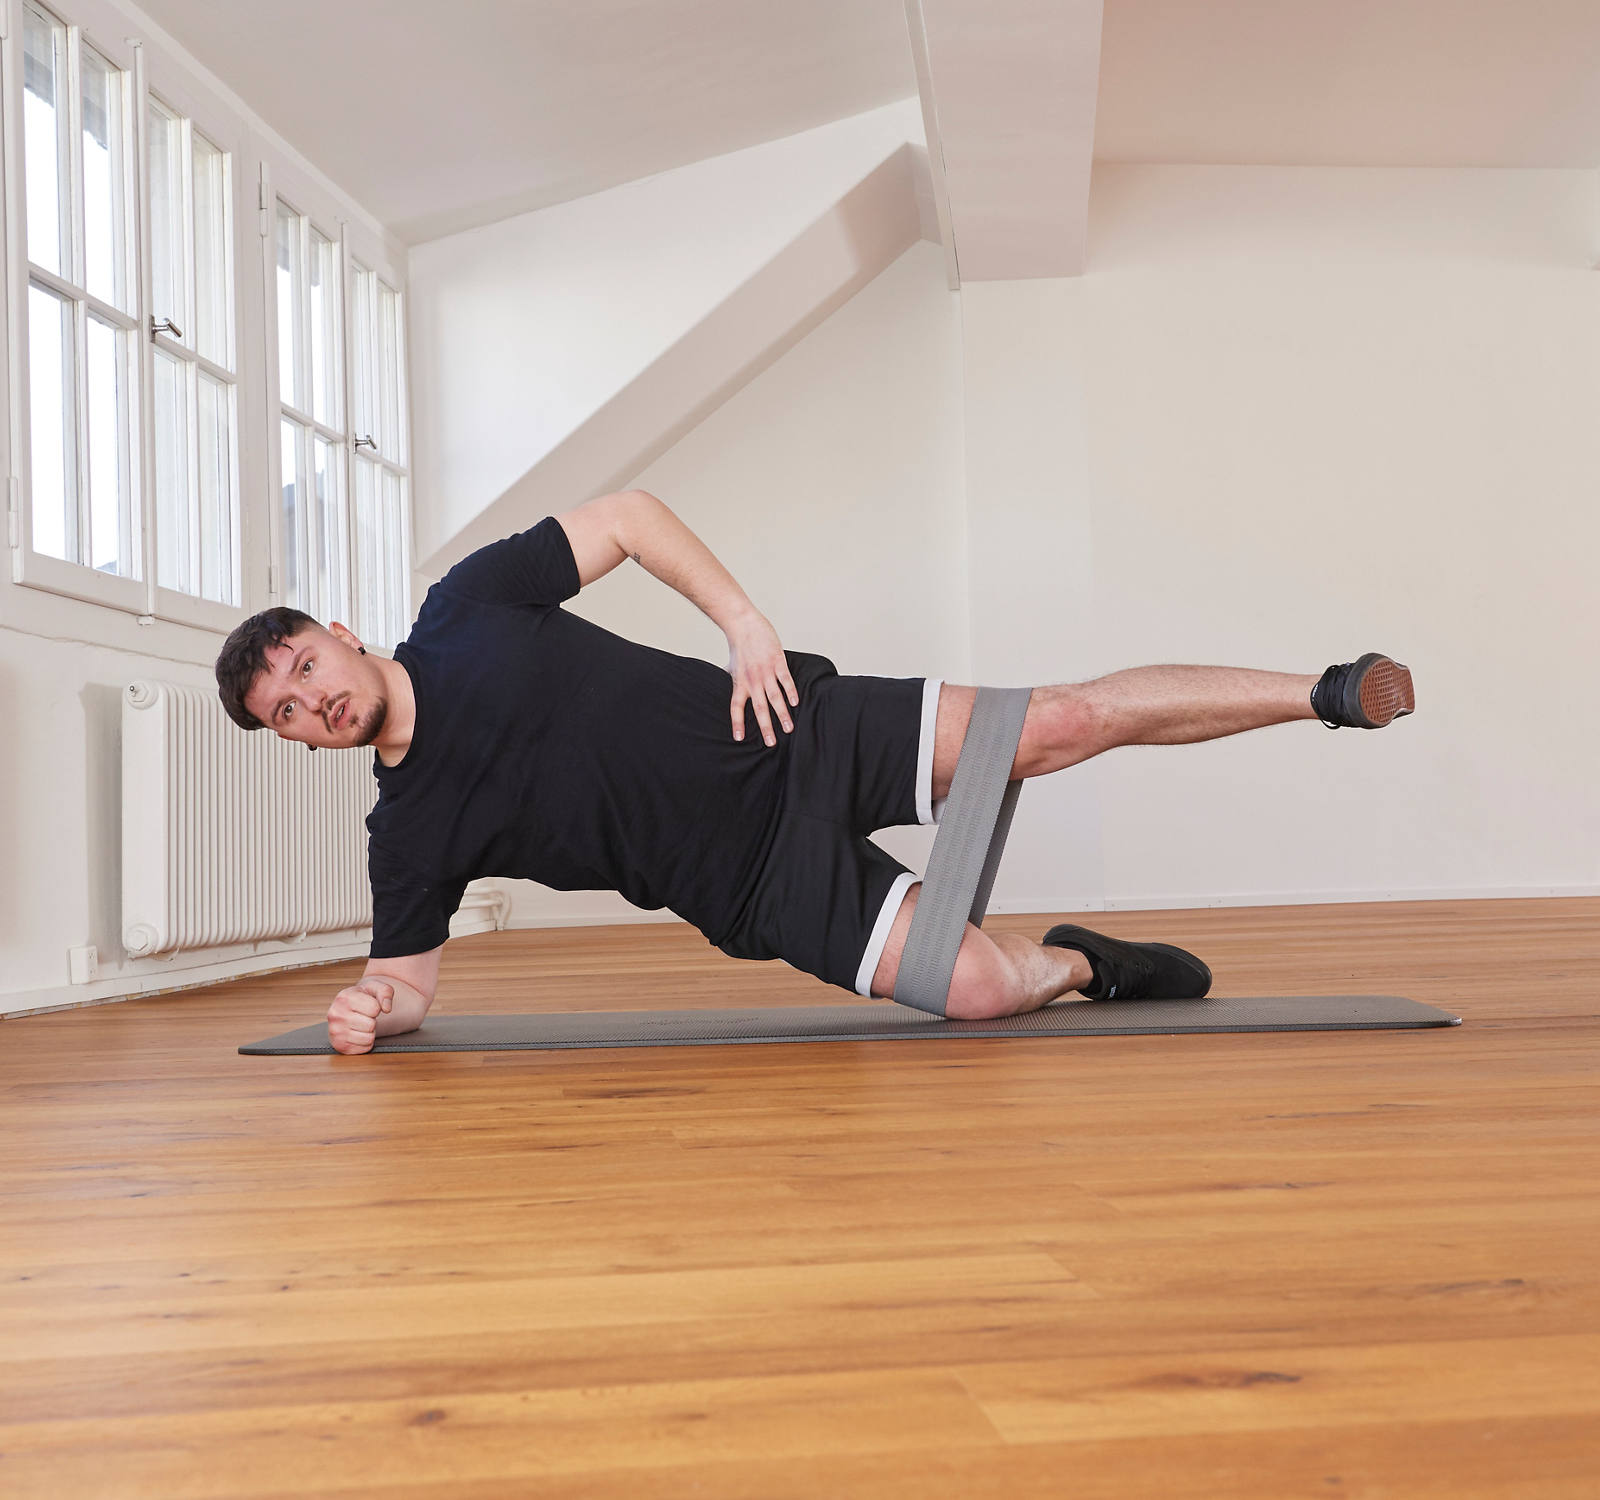 Training with a mini band: Side plank position 2